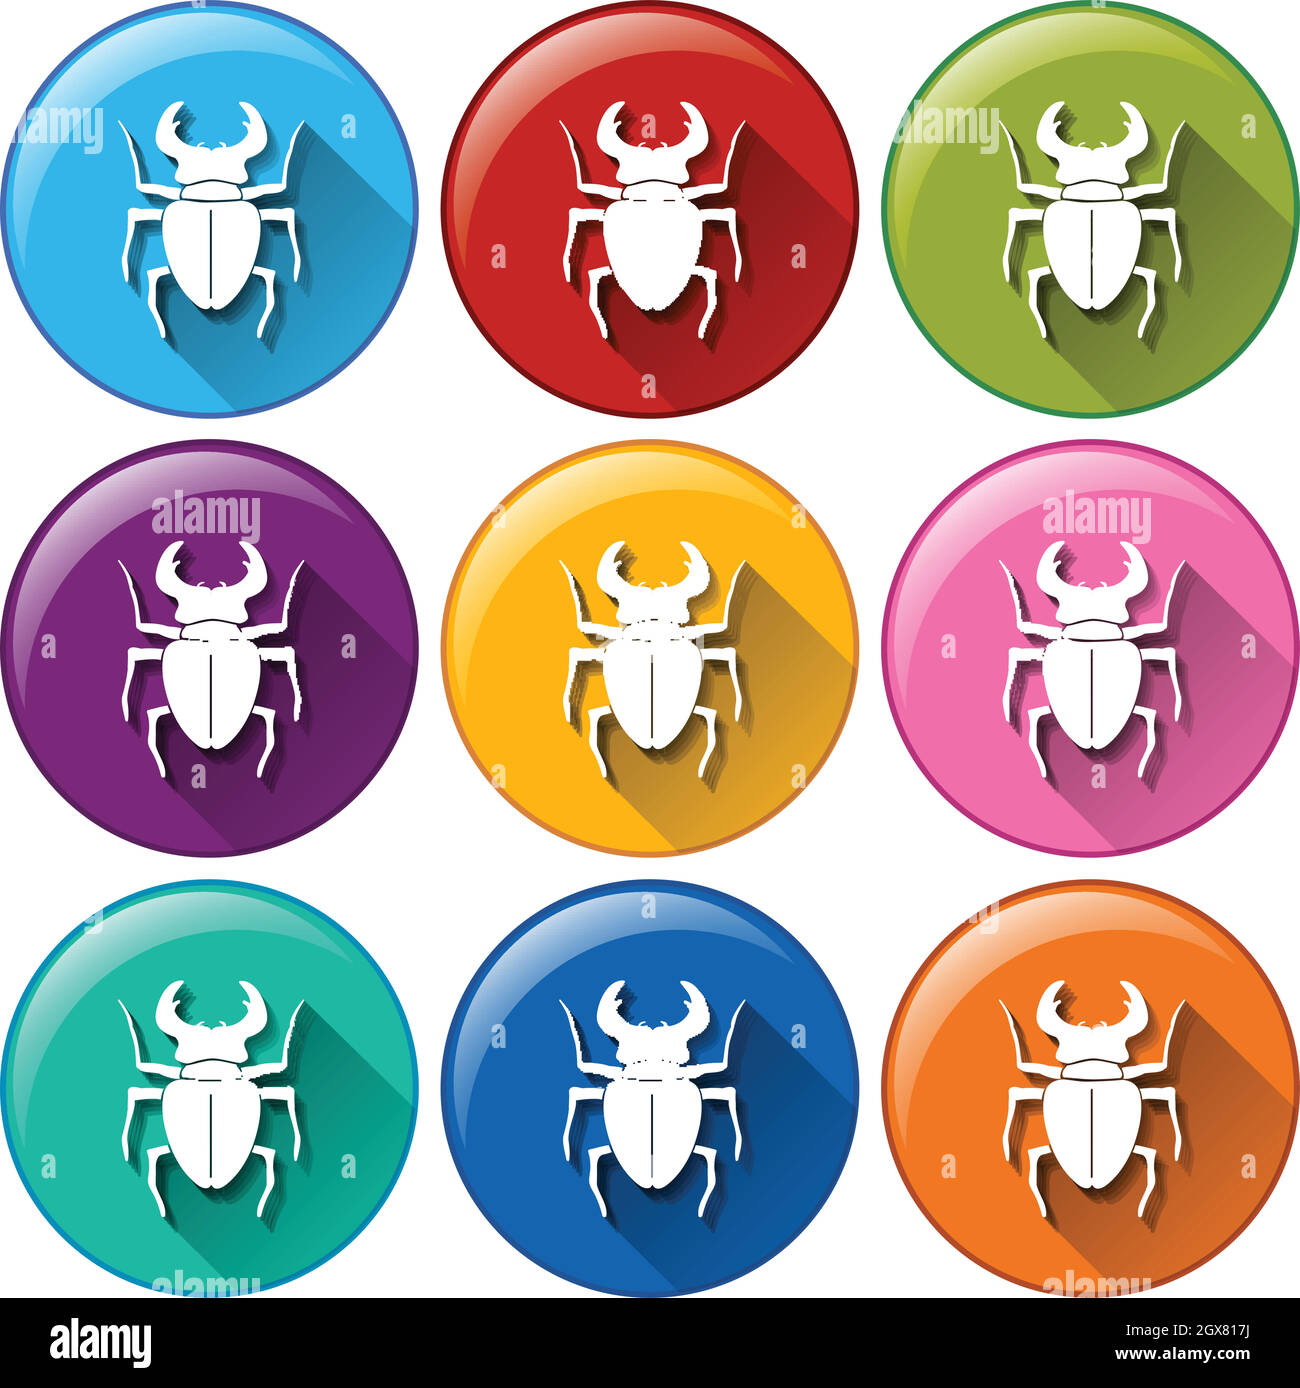 Round icons with scorpions Stock Vector